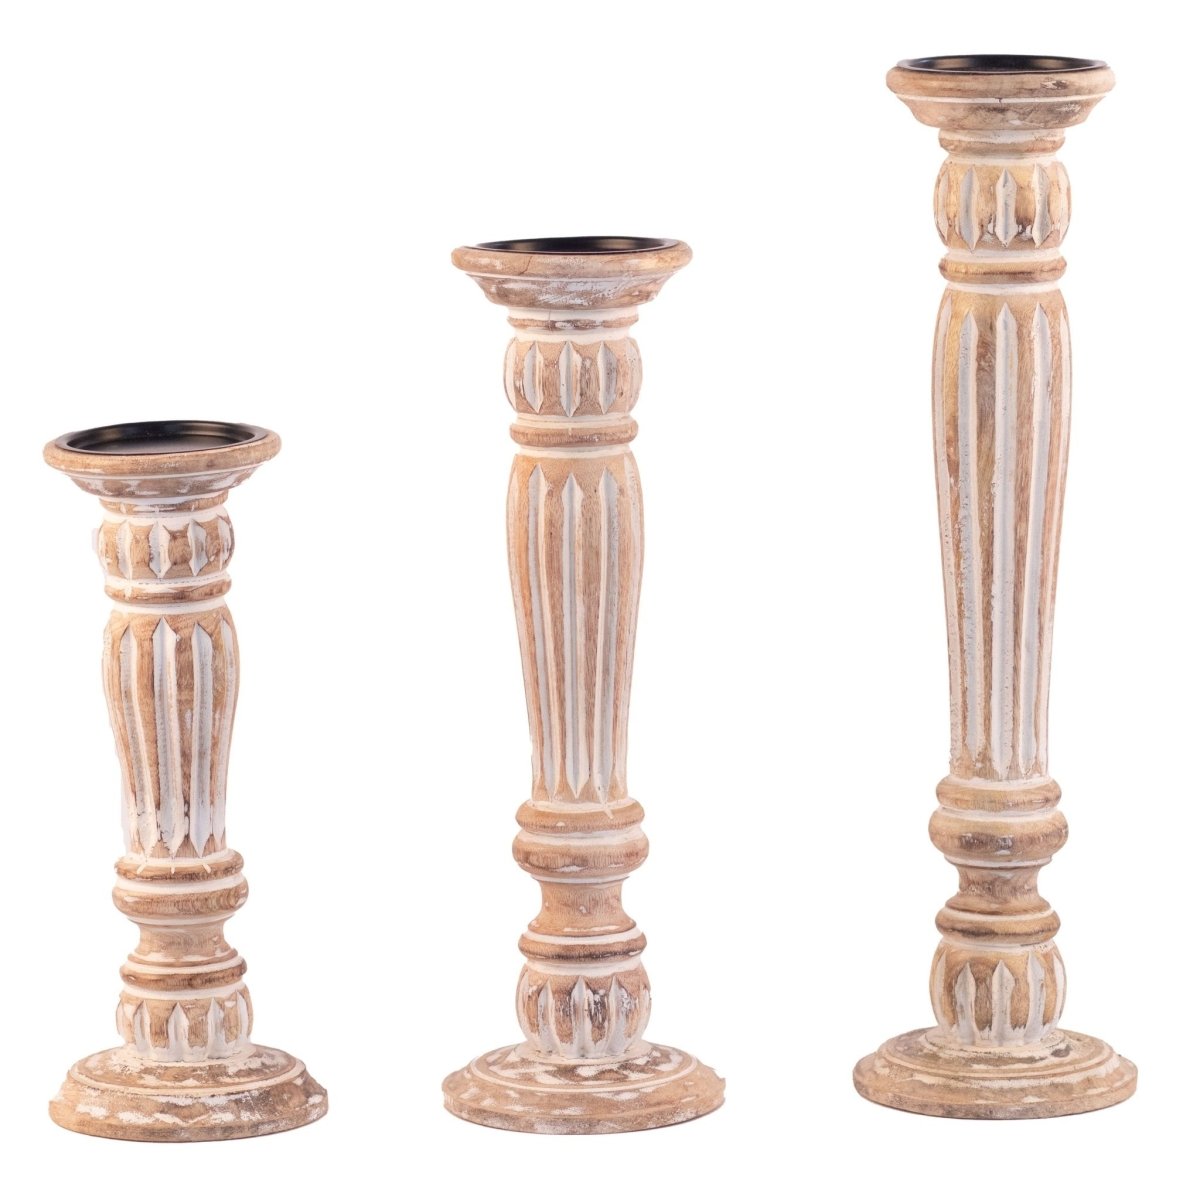 Kezevel Wooden Candle Stand - Artistic 18" H White and Brown Mango Wood Candle Holders for Home Decoration , Room Decoration